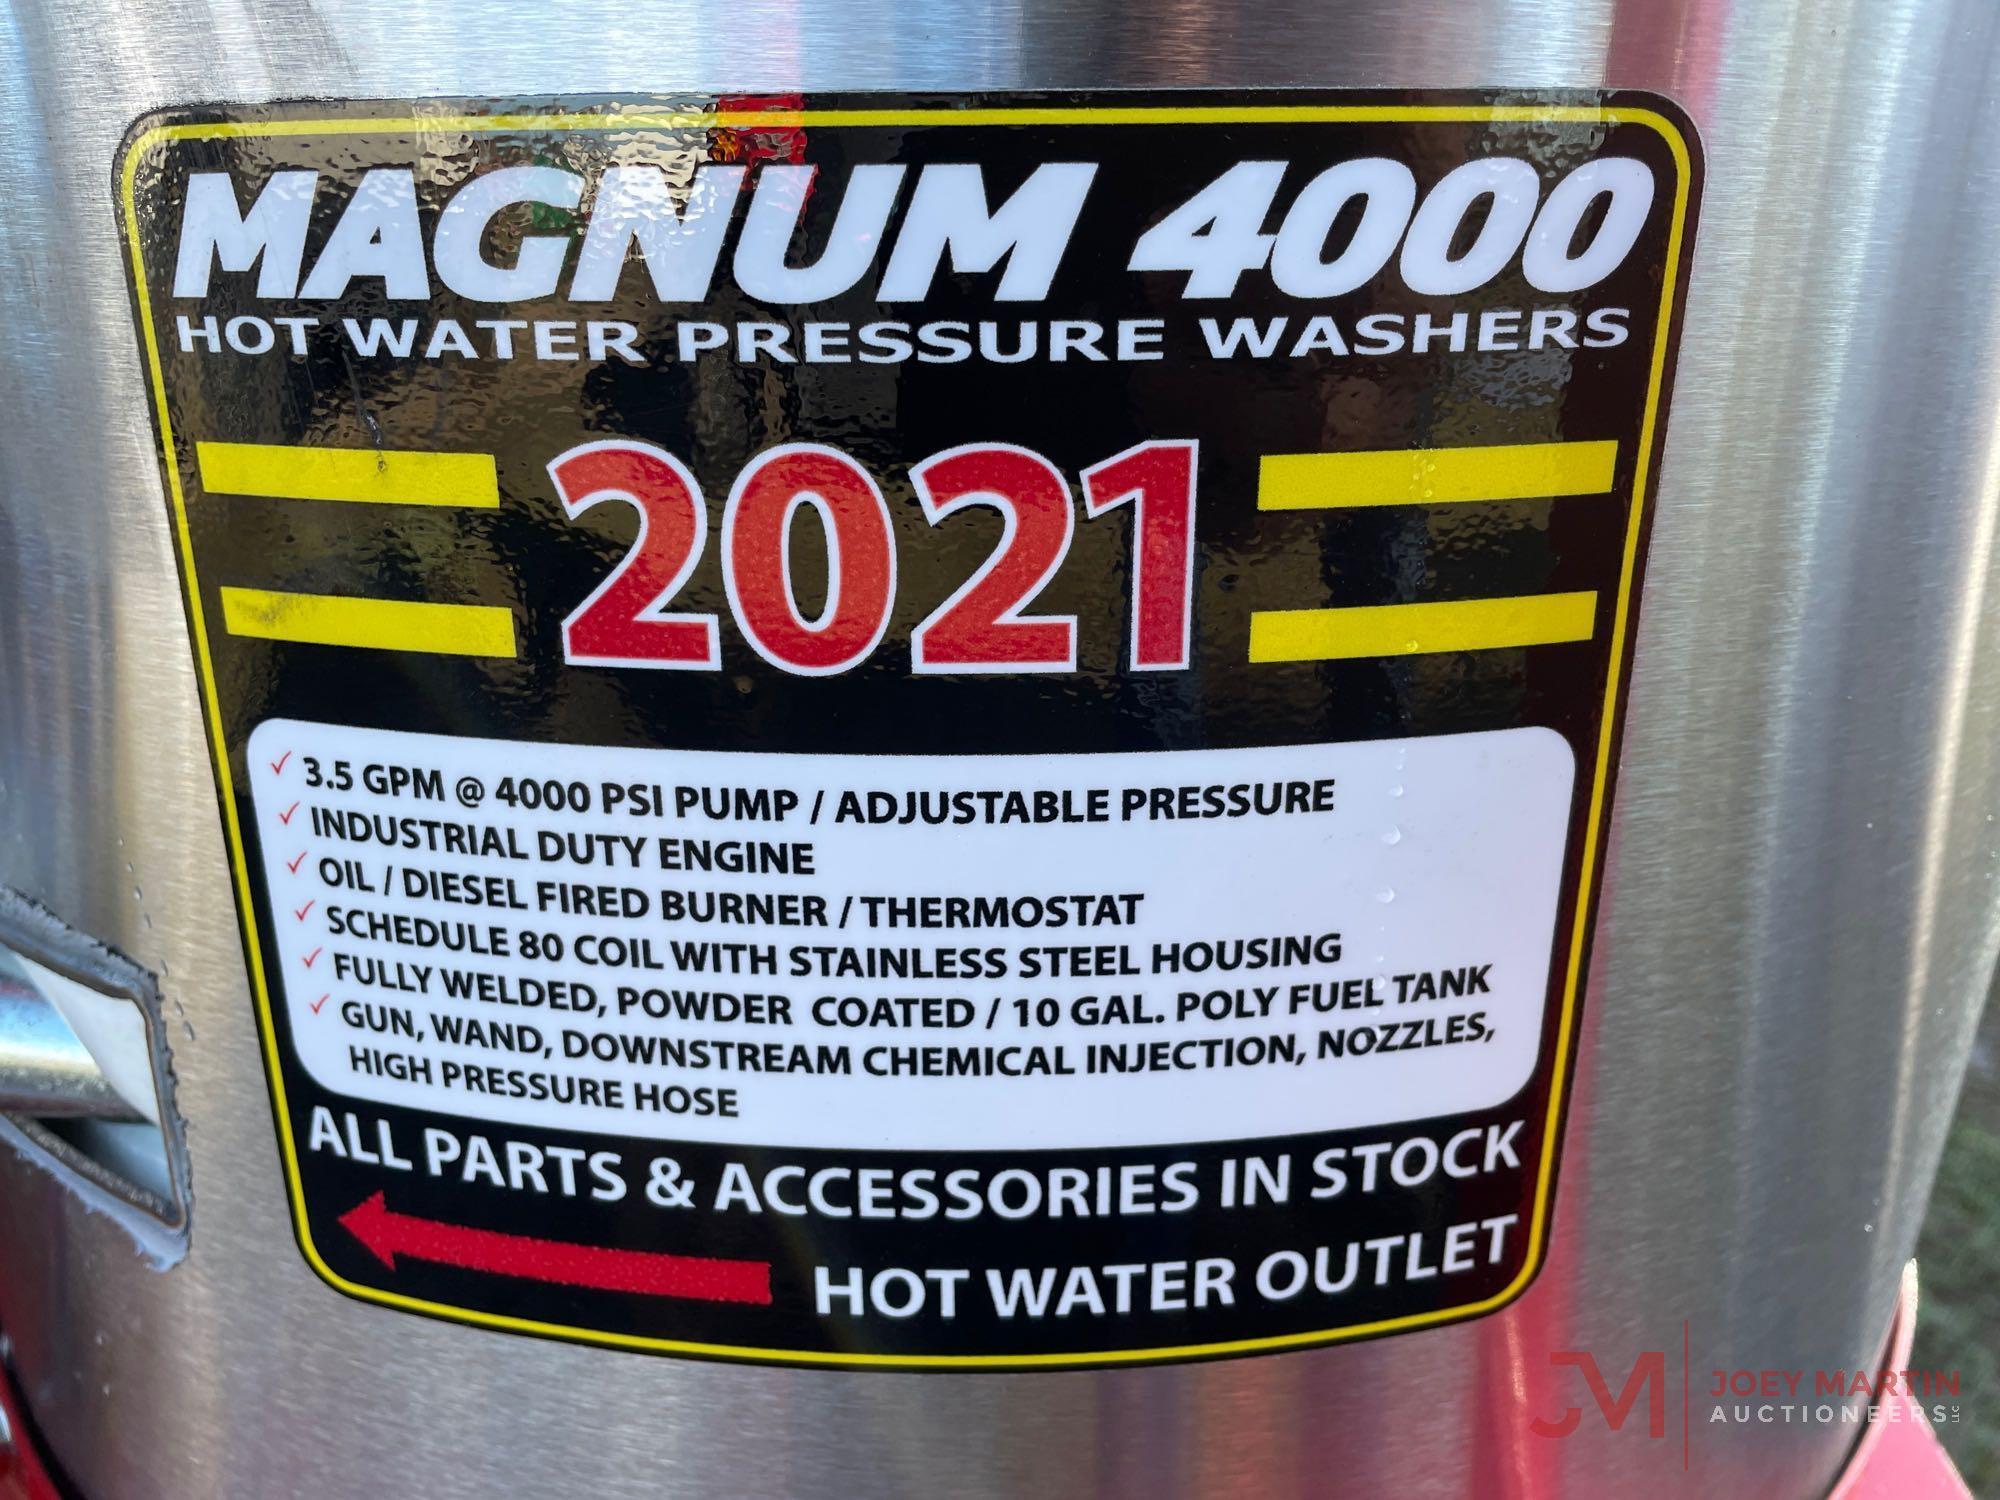 NEW MAGNUM 4000 SERIES GOLD PORTABLE HOT WATER PRESSURE WASHER